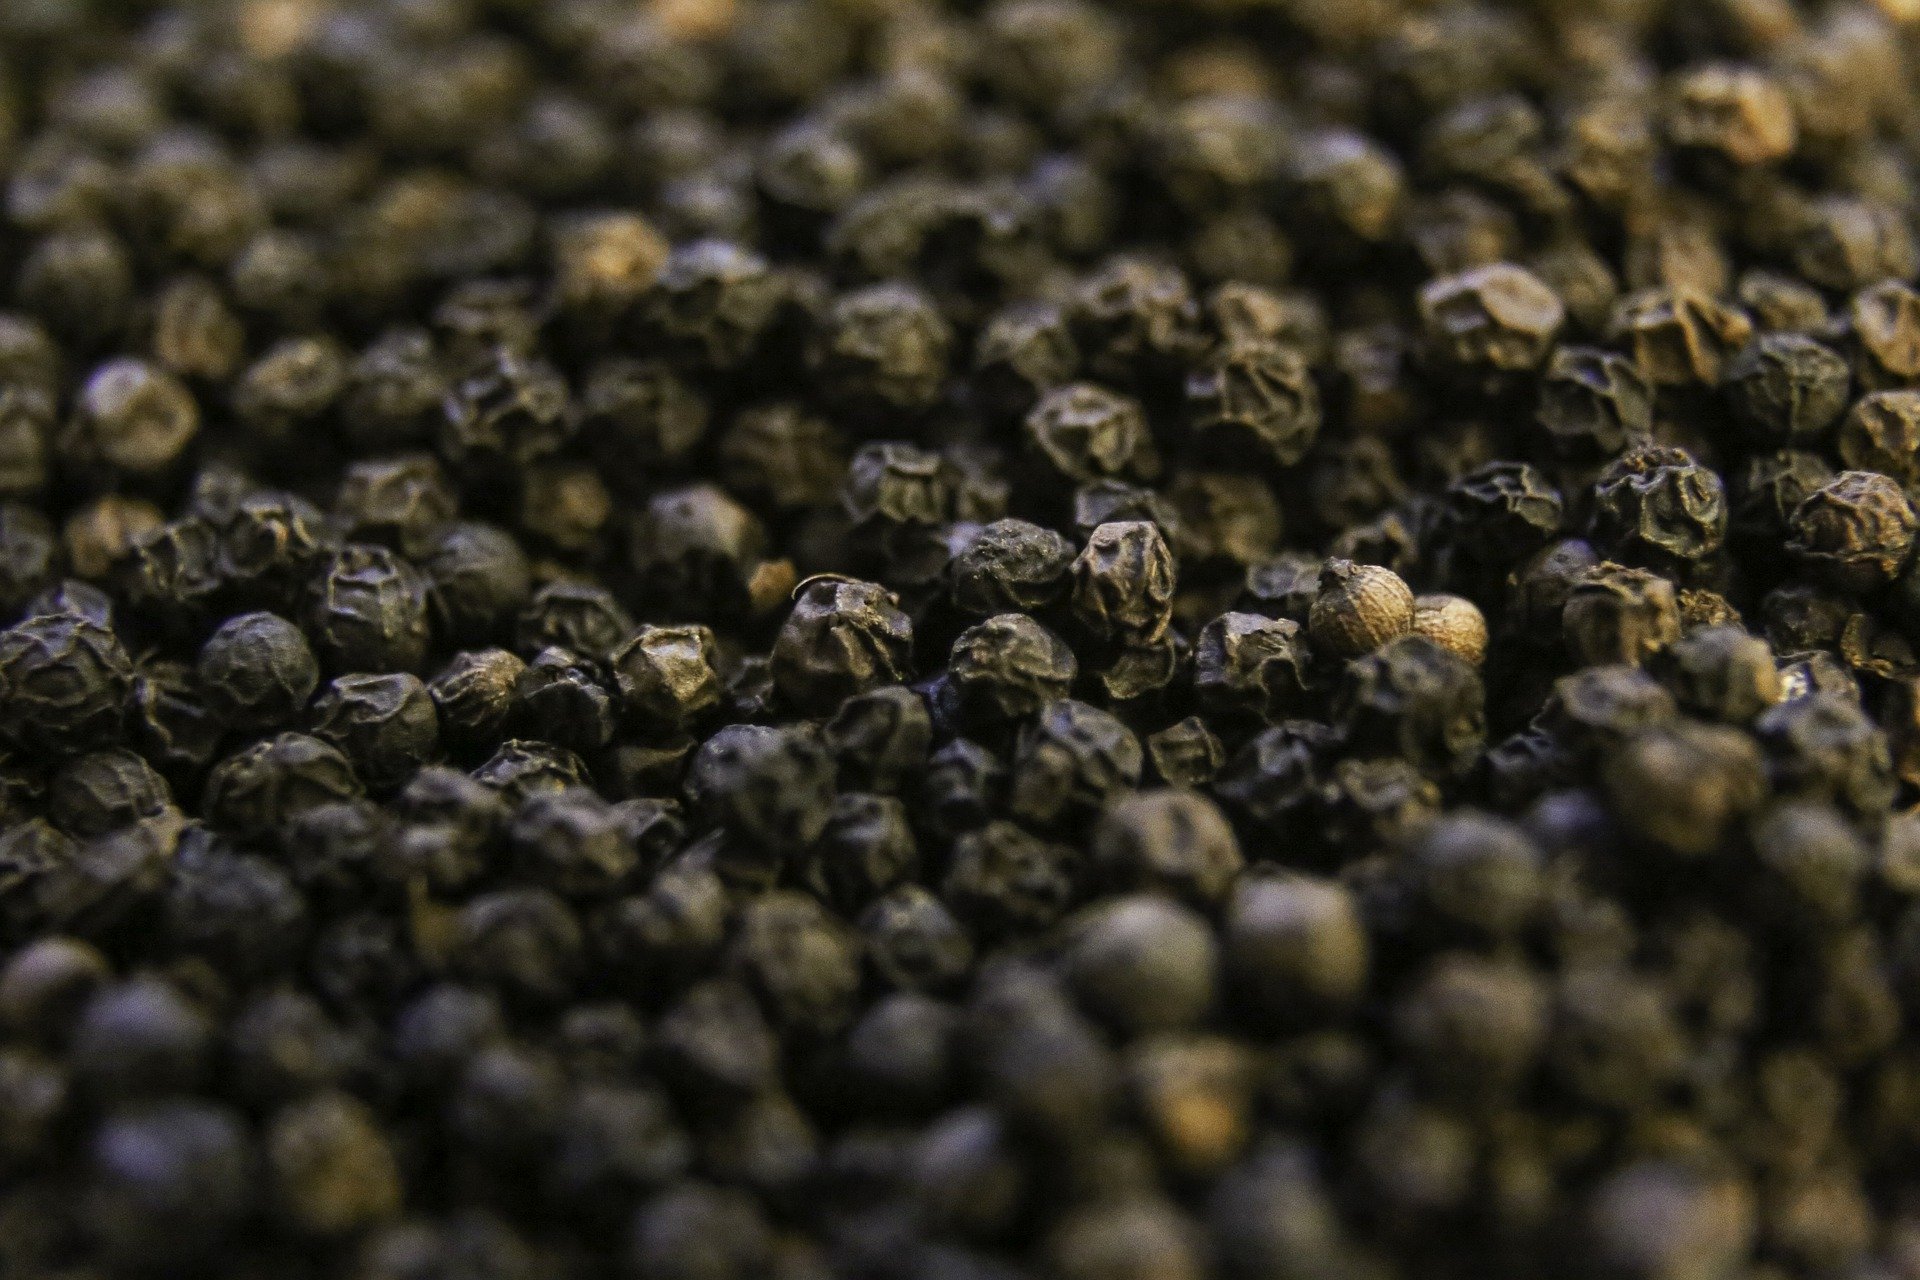 Black pepper farming and Cultivation in India